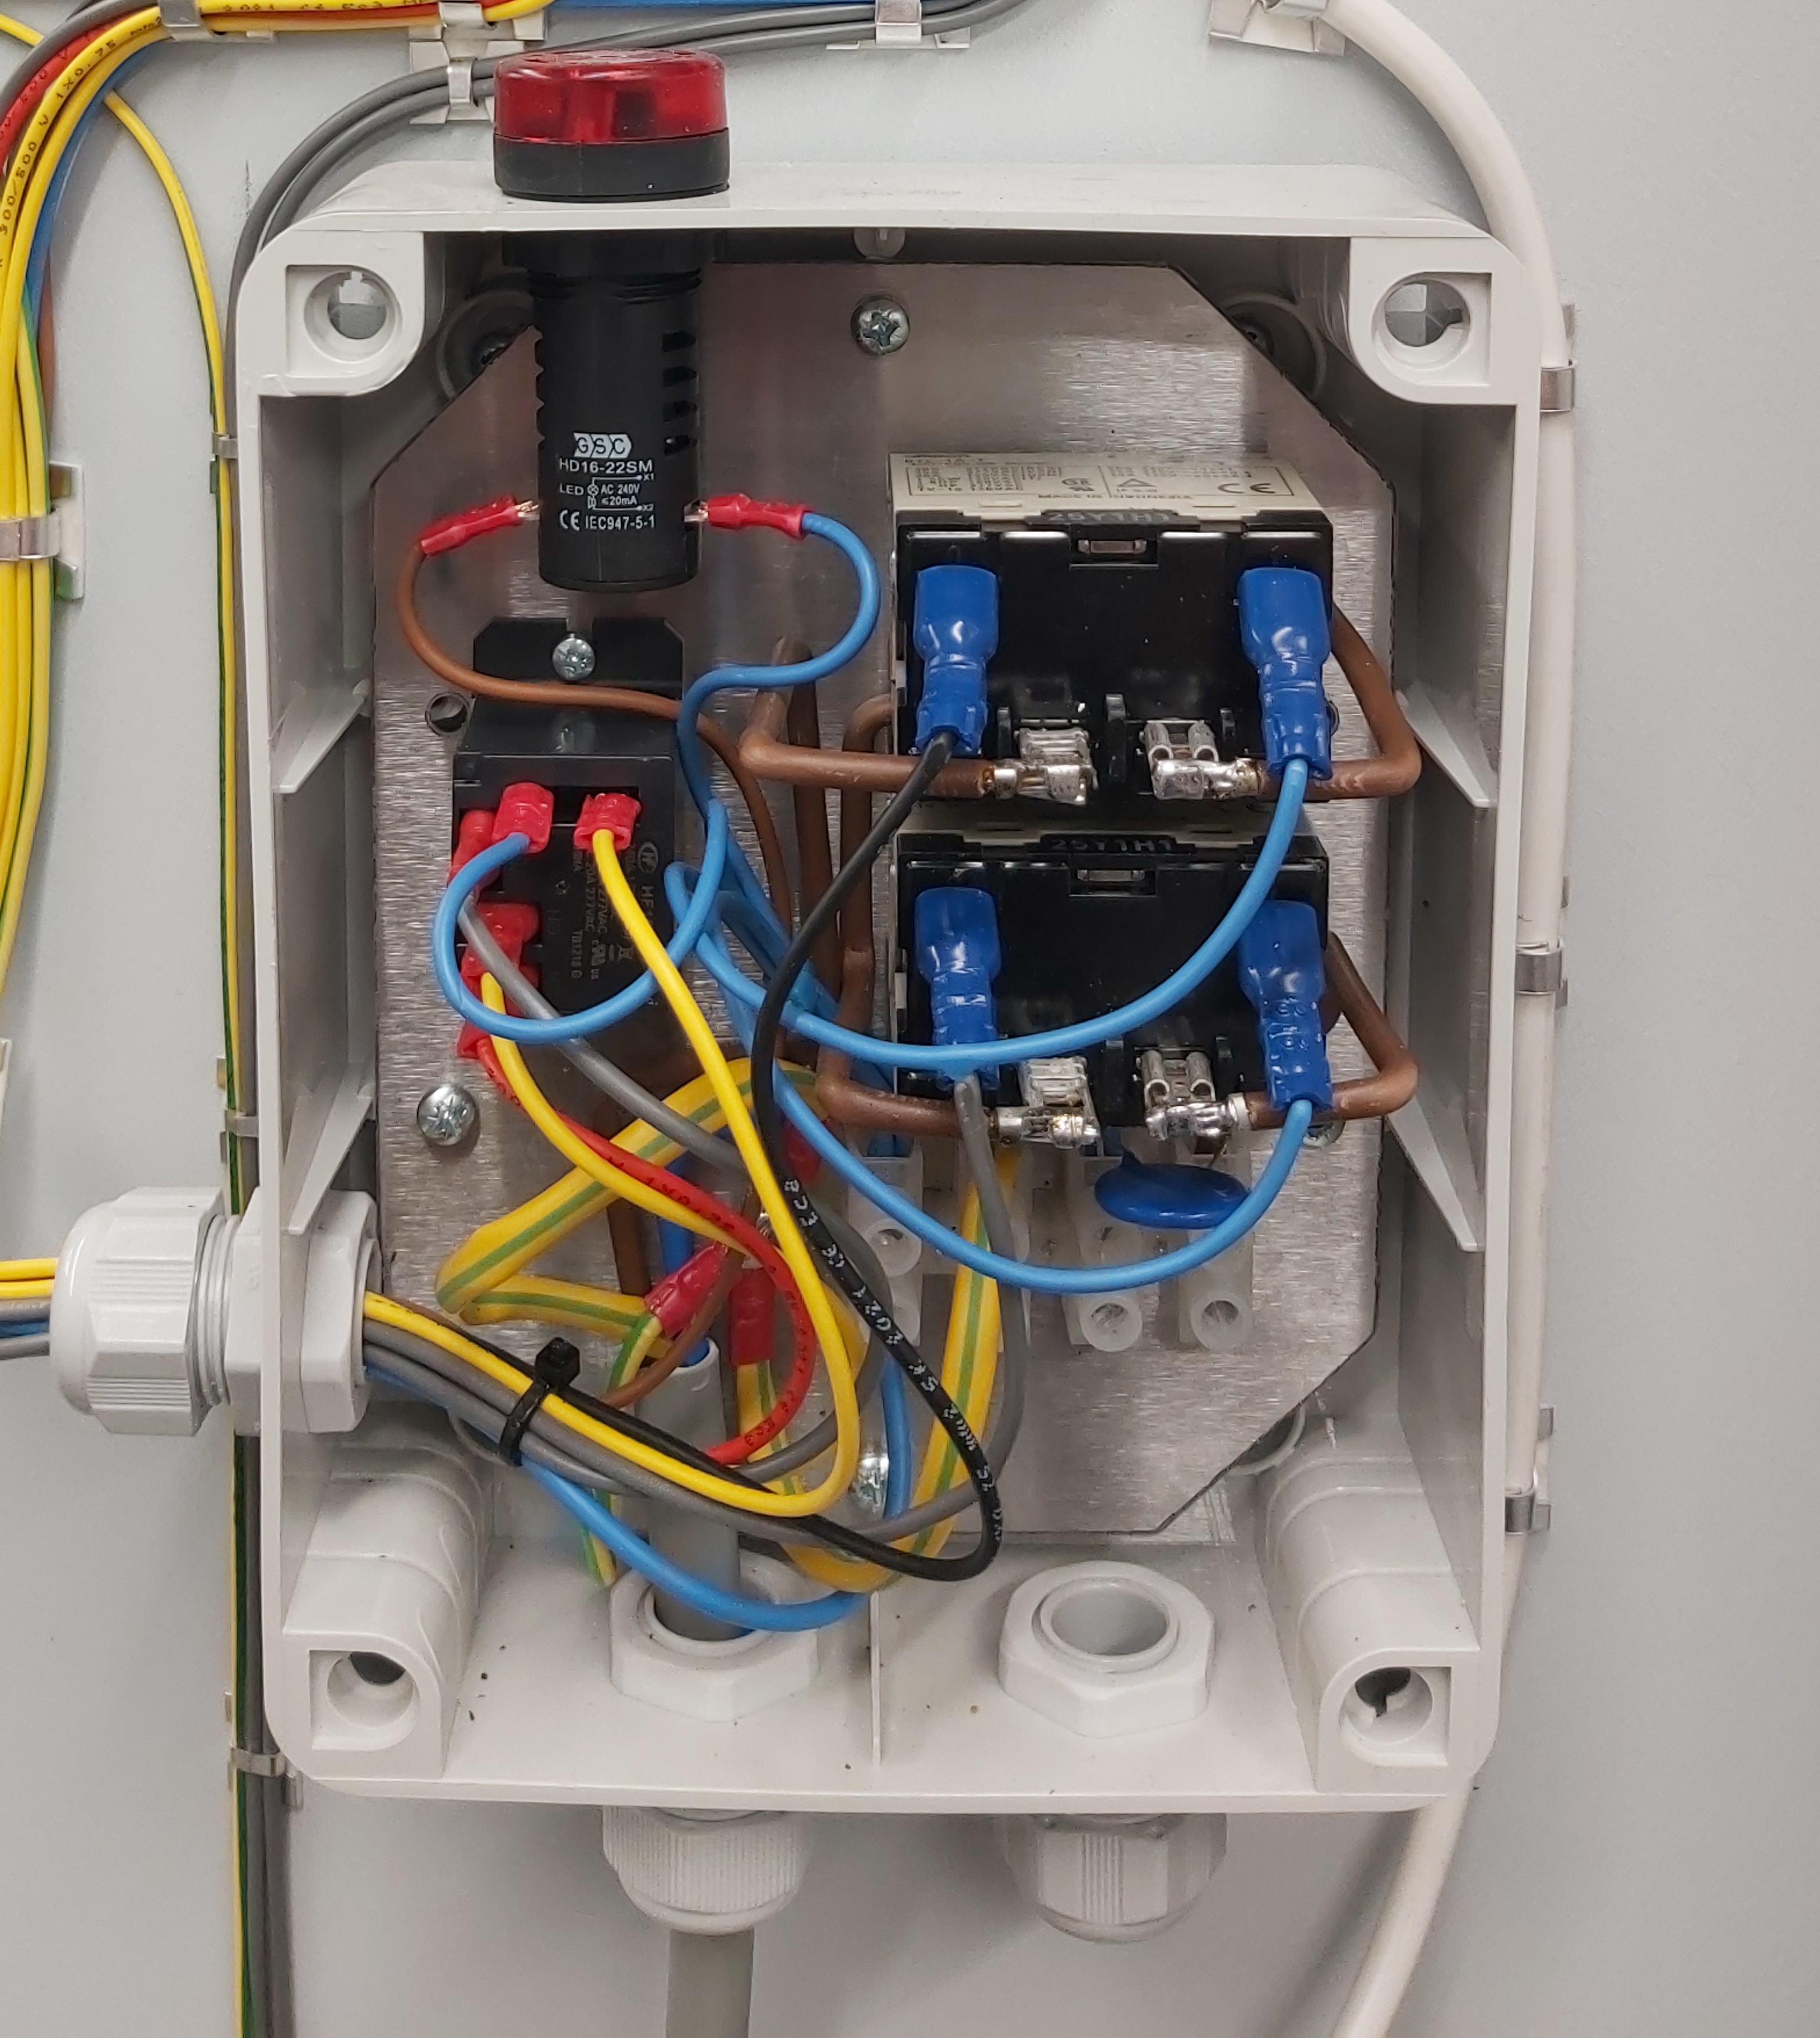 30 AMP CONTROL BOX USED WITH ELECTRIC COMBI BOILER